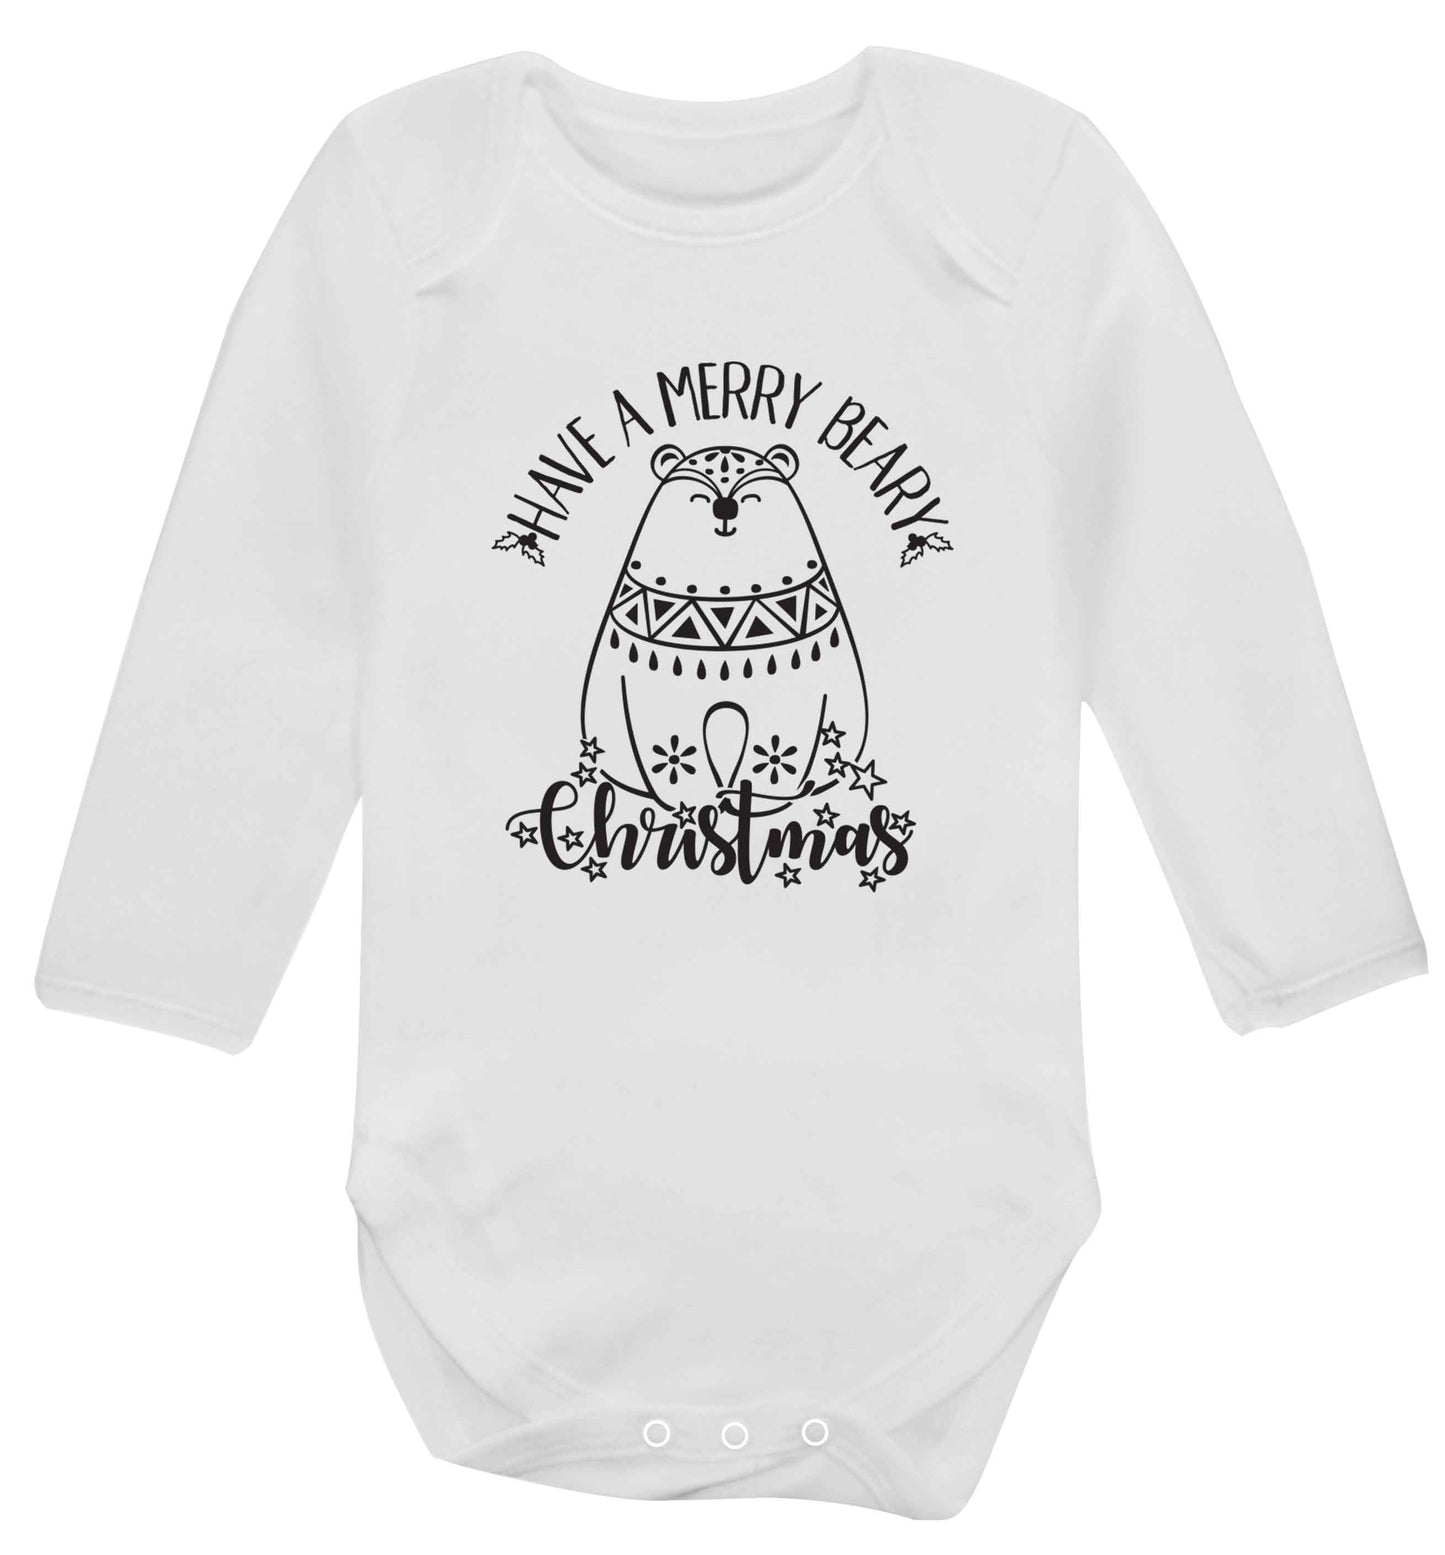 Have a merry beary Christmas Baby Vest long sleeved white 6-12 months